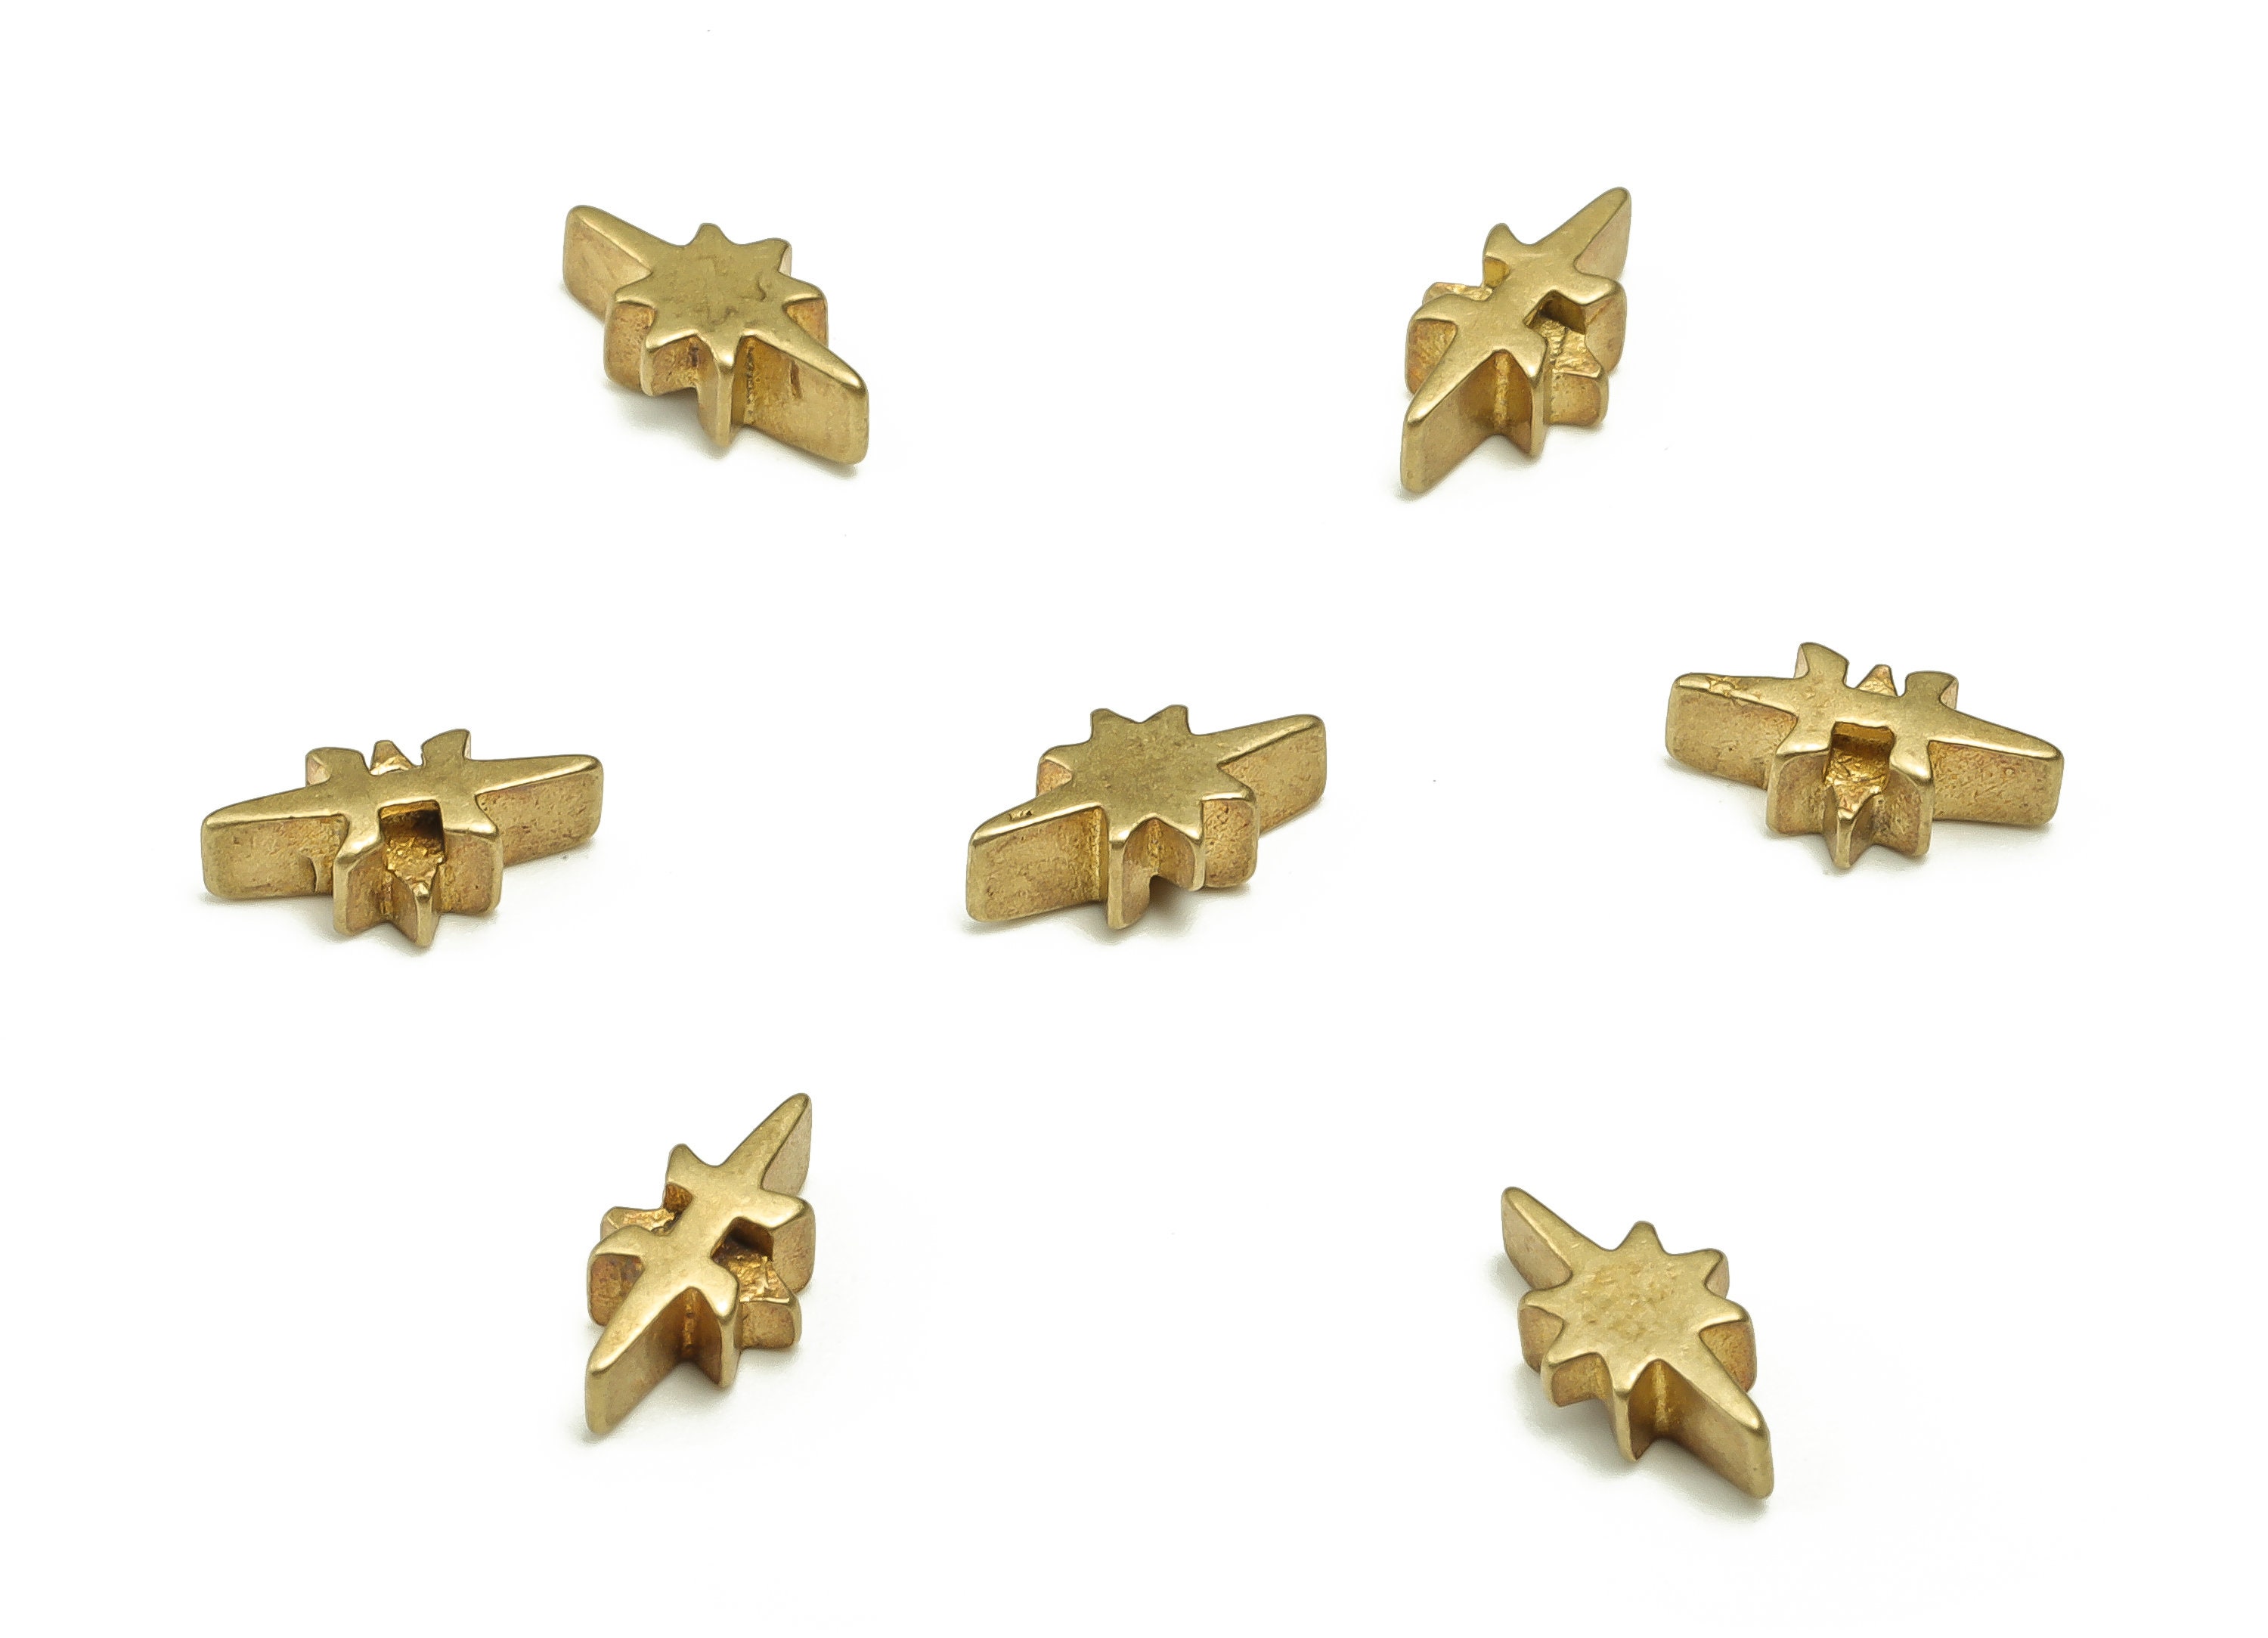 Dreamtop 66 Pieces Brass Gold Spacer Beads Star India